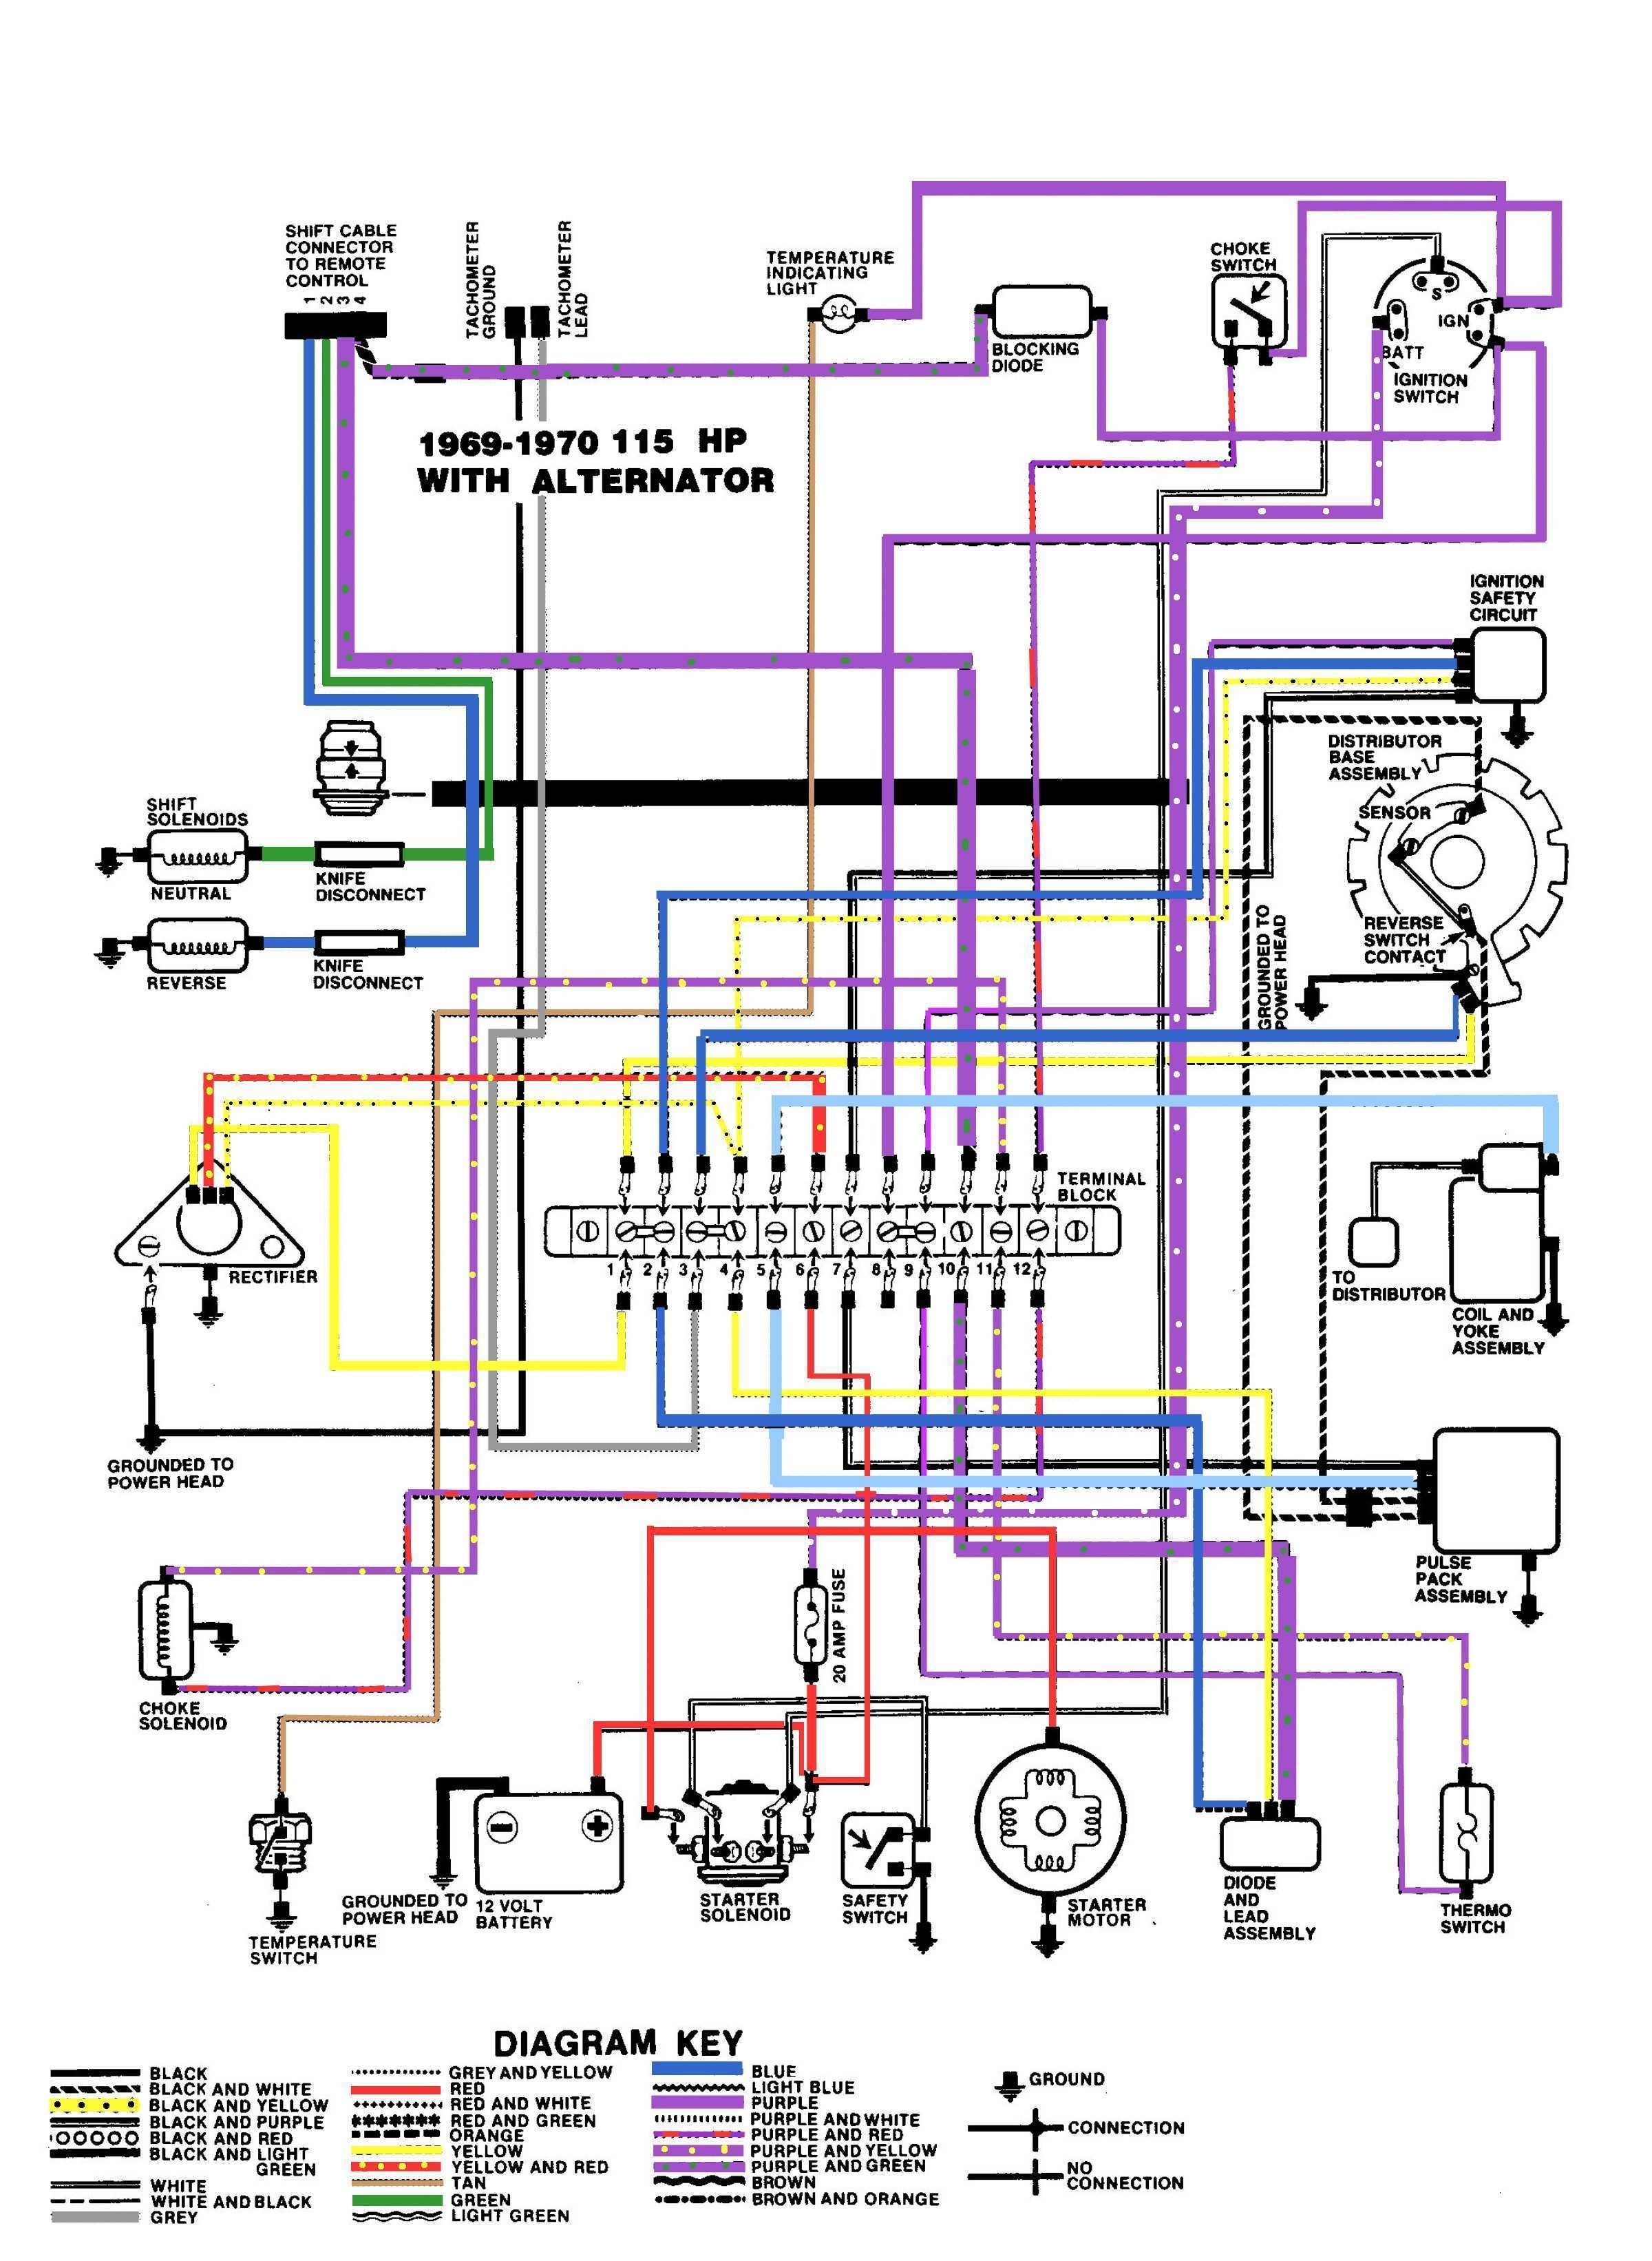 Wiring Diagram for Johnson Outboard Ignition Switch Fresh 1970 Johnson Wiring Diagram Wire Center •